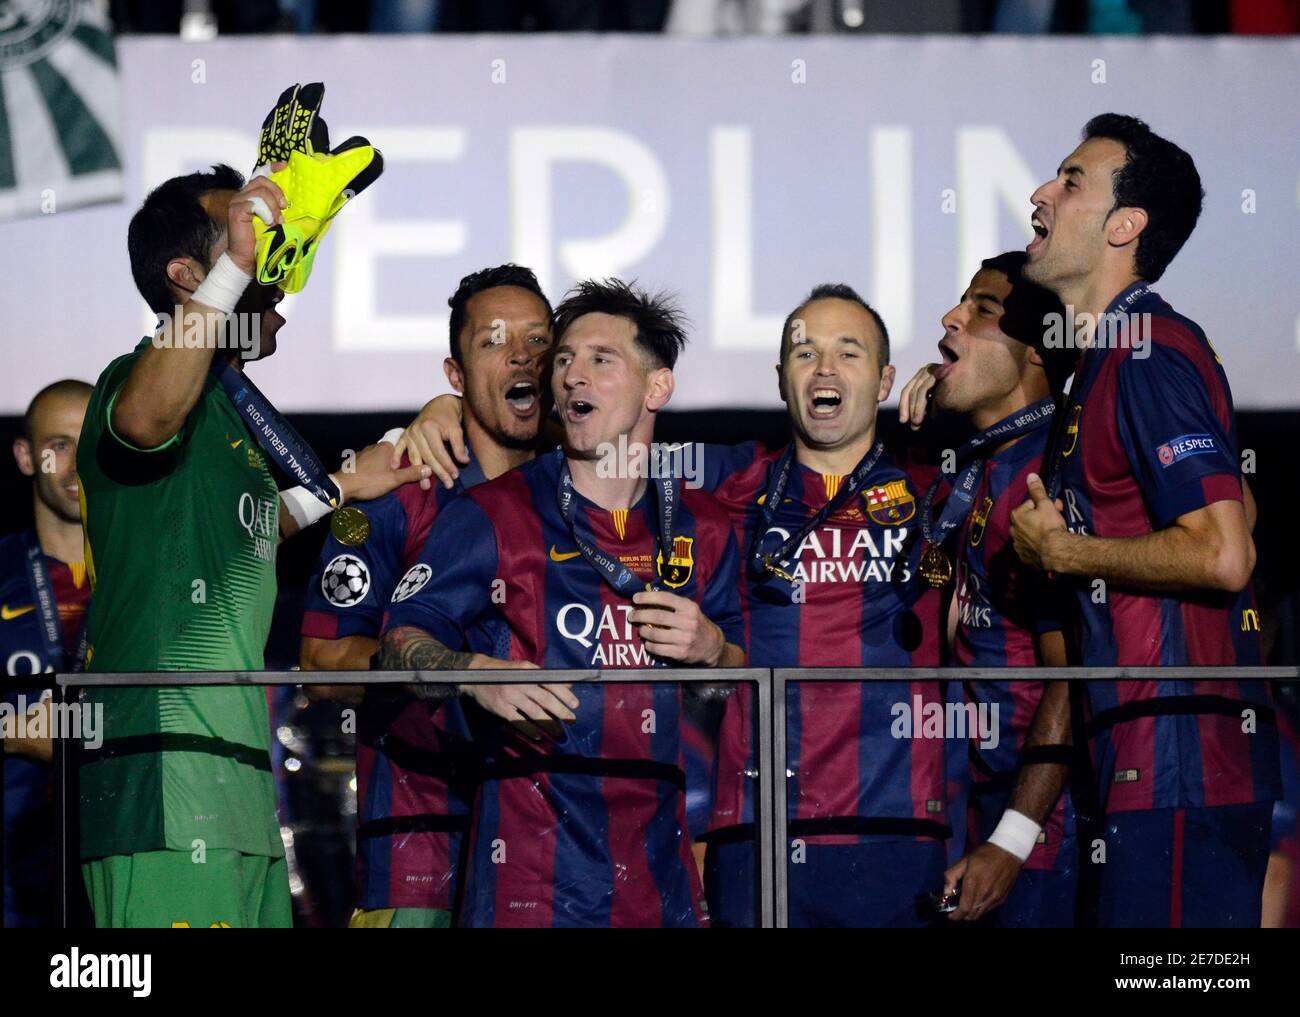 BERLIN, GERMANY - JUNE 6, 2015: Barceloan players pictured during the award ceremony held after the 2014/15 UEFA Champions League Final between Juventus Torino and FC Barcelona at Olympiastadion. Stock Photo